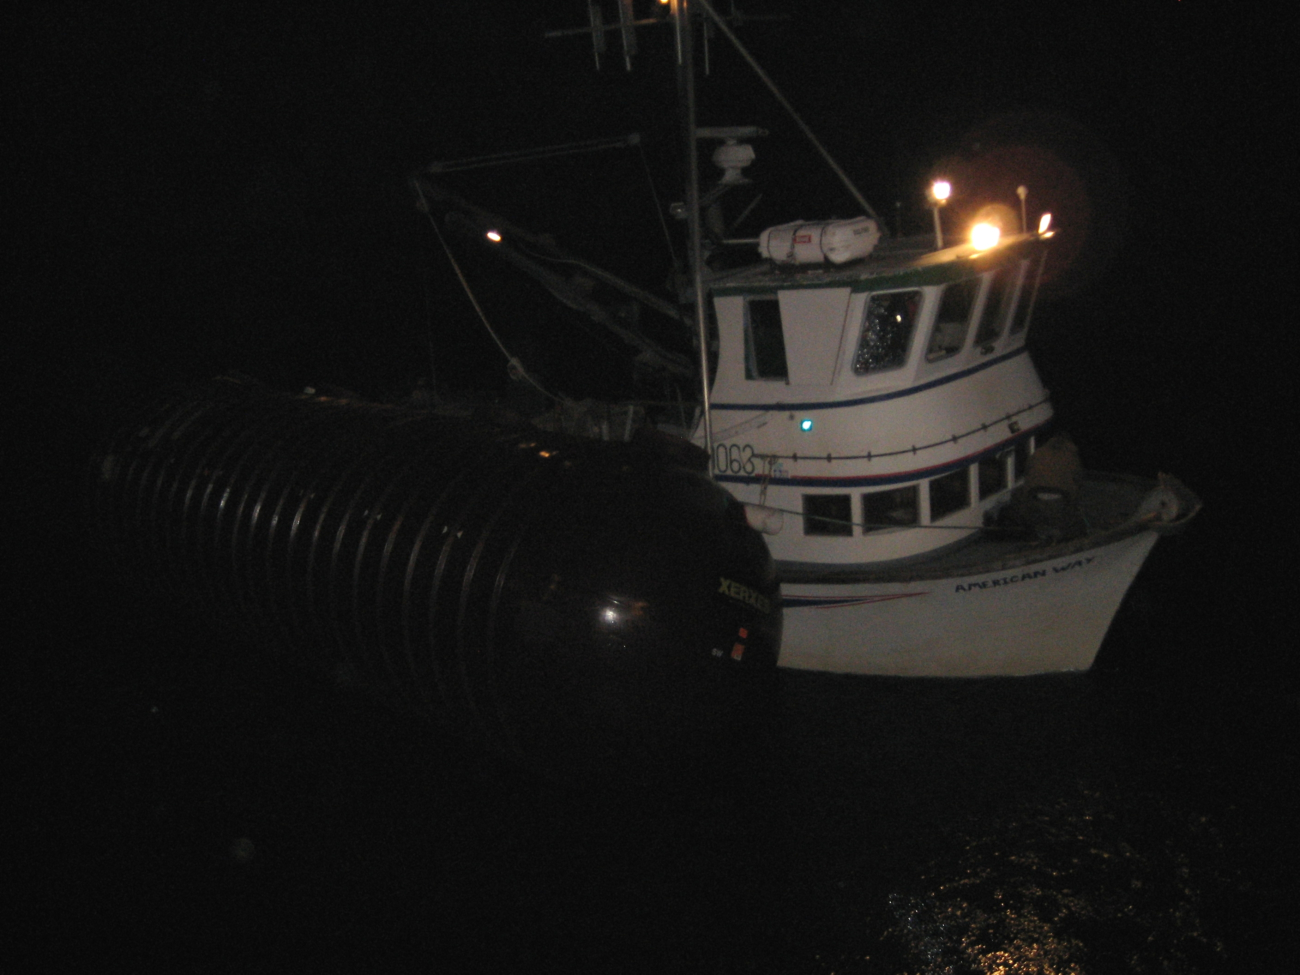 Fishing vessel tied up outboard of SS Coastal Nomad during ferocious winterstorm